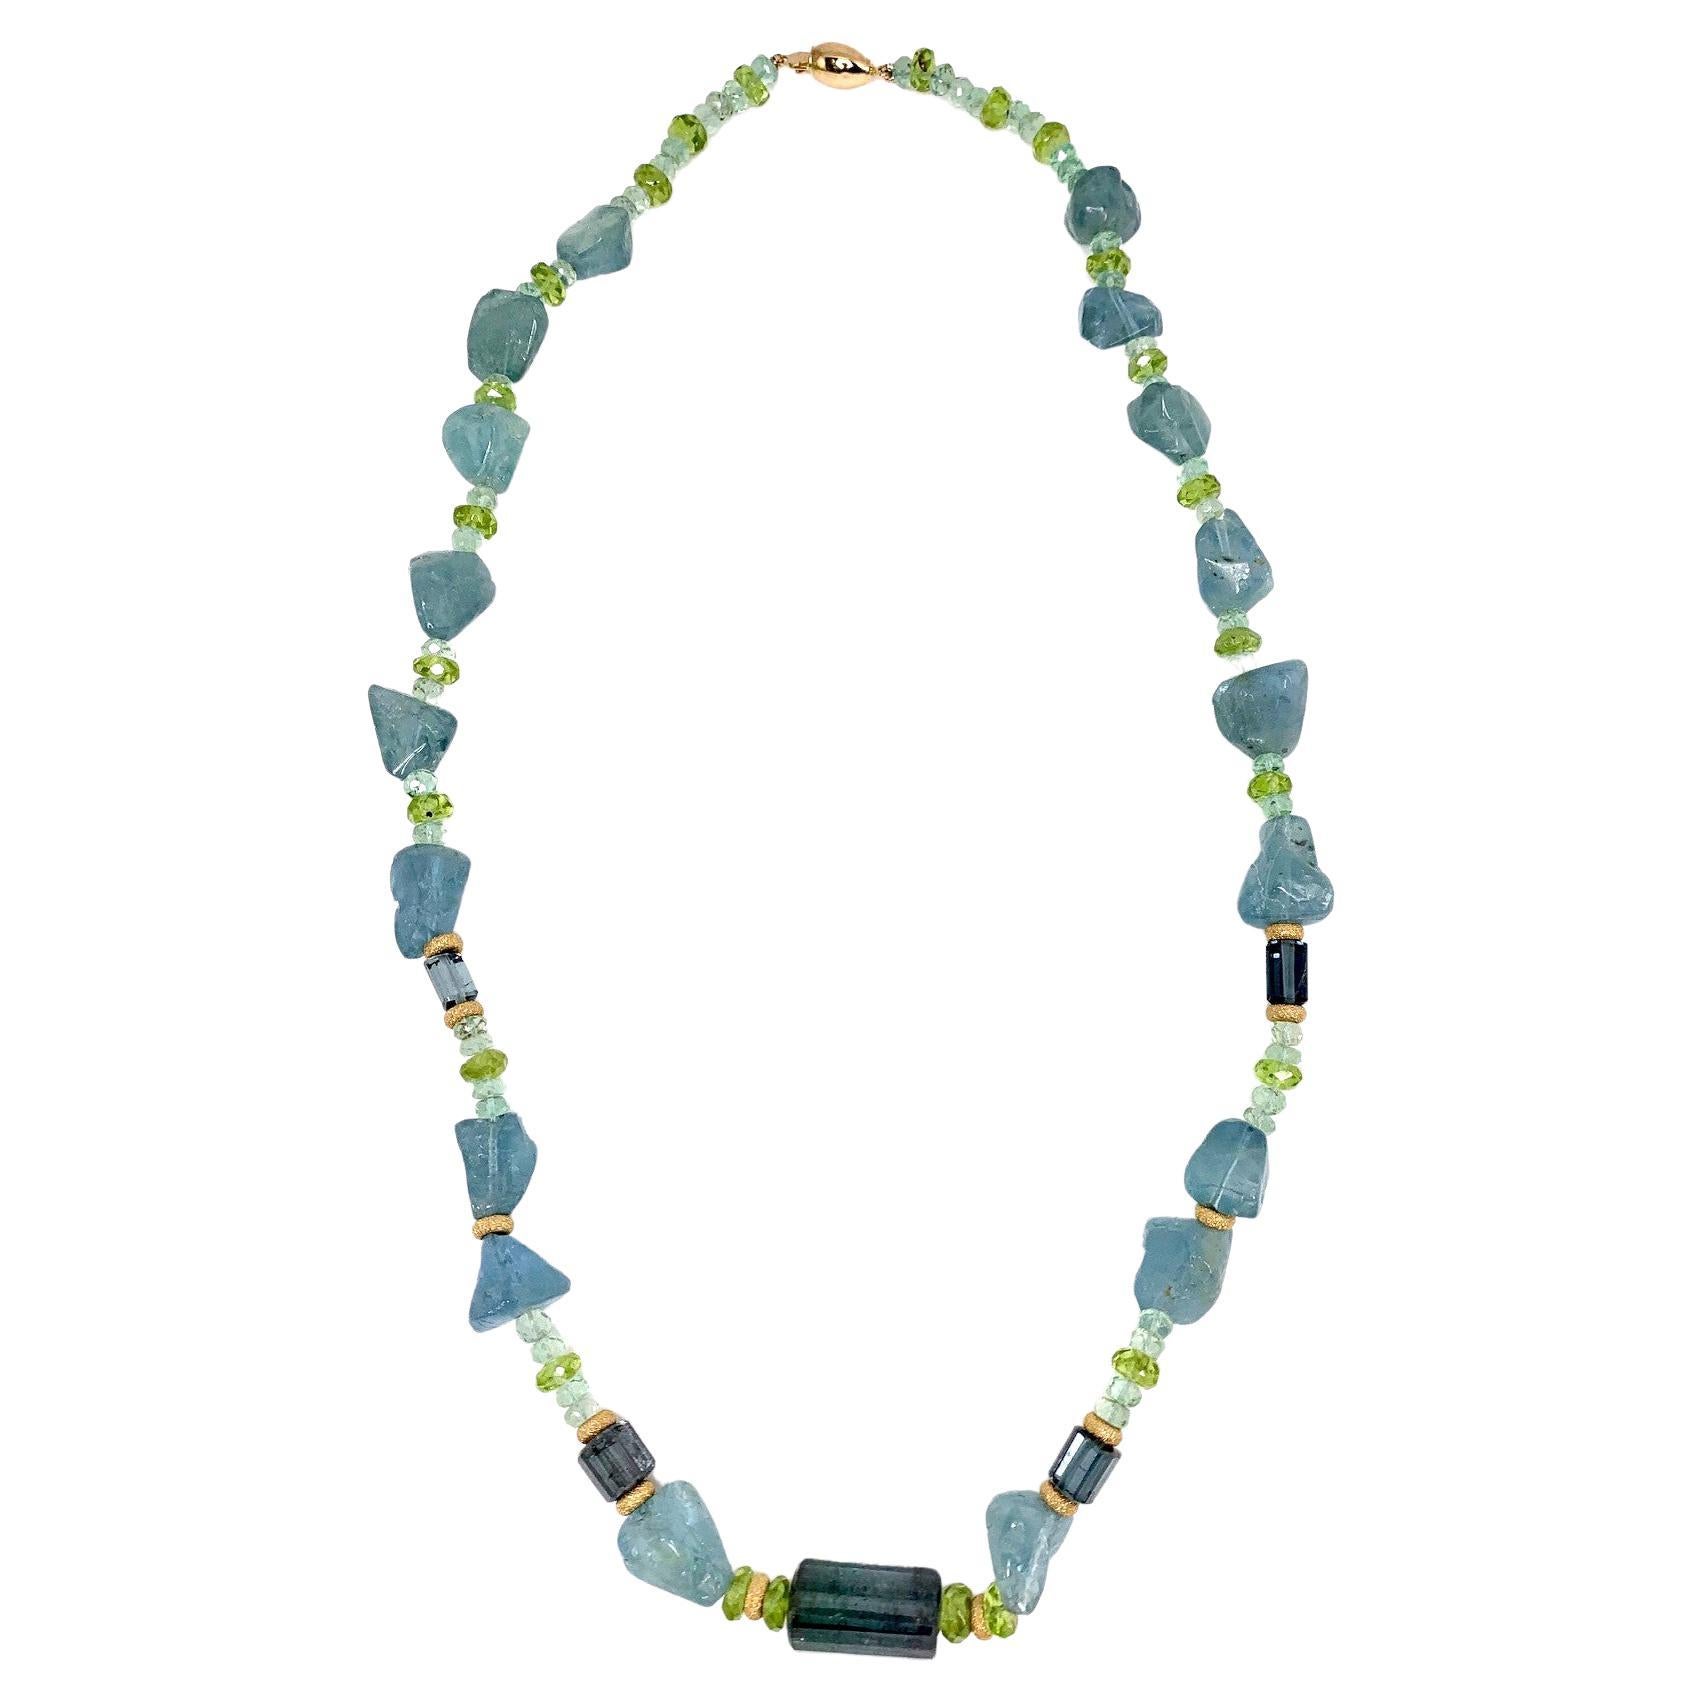 Sea water blue aquamarine, teal blue indicolite tourmaline and lime green peridot come together and blend beautifully in this necklace. This strand features aquamarine nuggets, faceted aquamarine beads, and elongated segments of indicolite